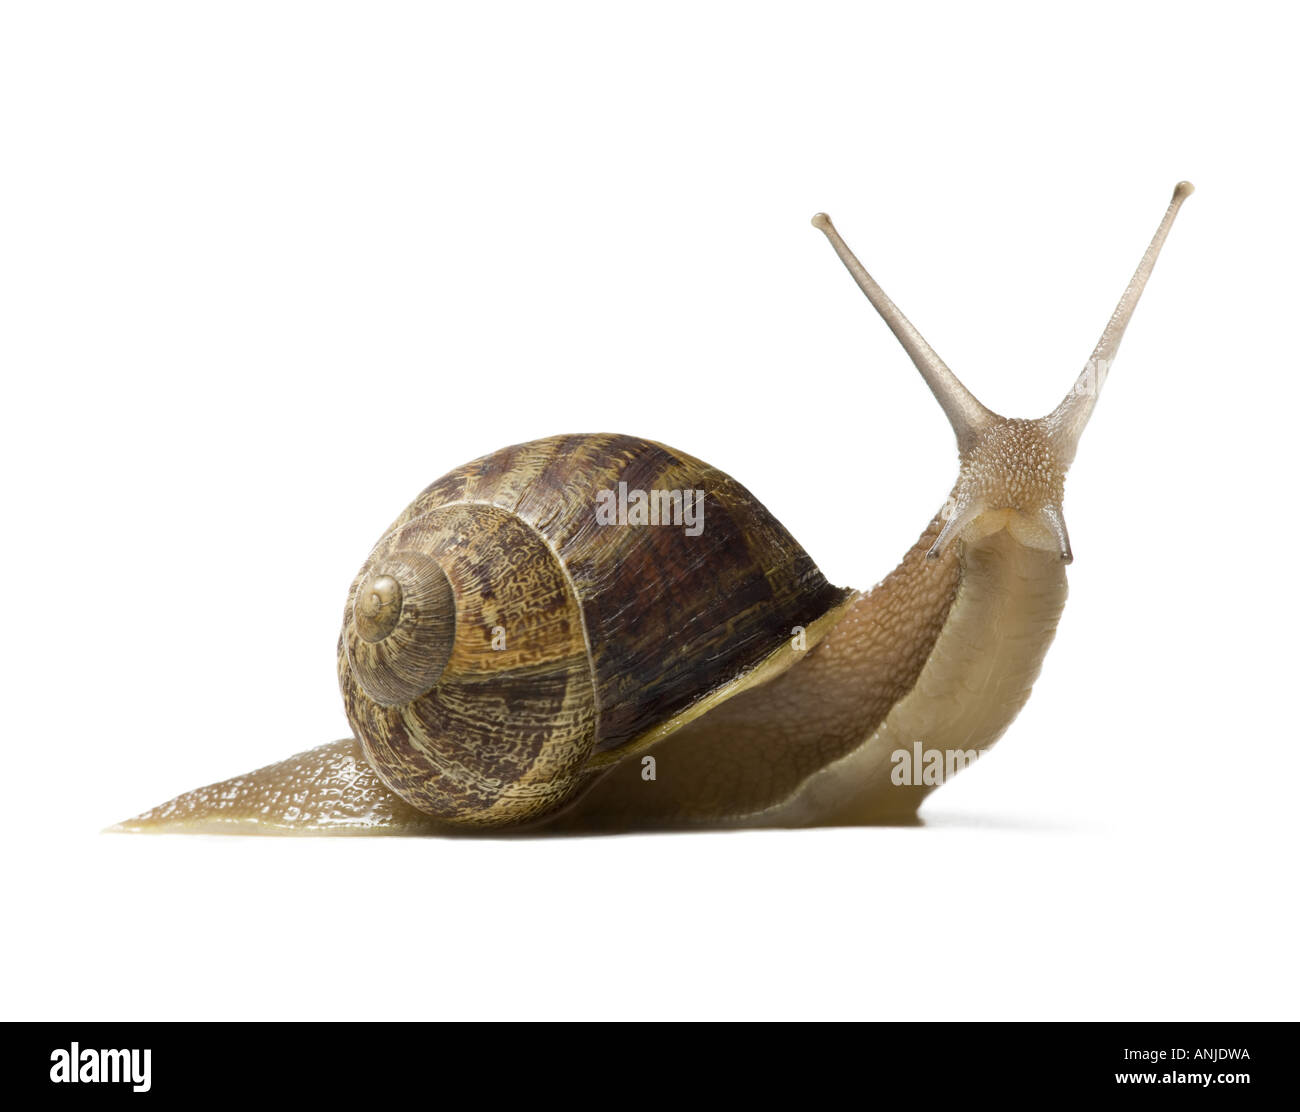 Close up of a snail on a white background silhouette Stock Photo